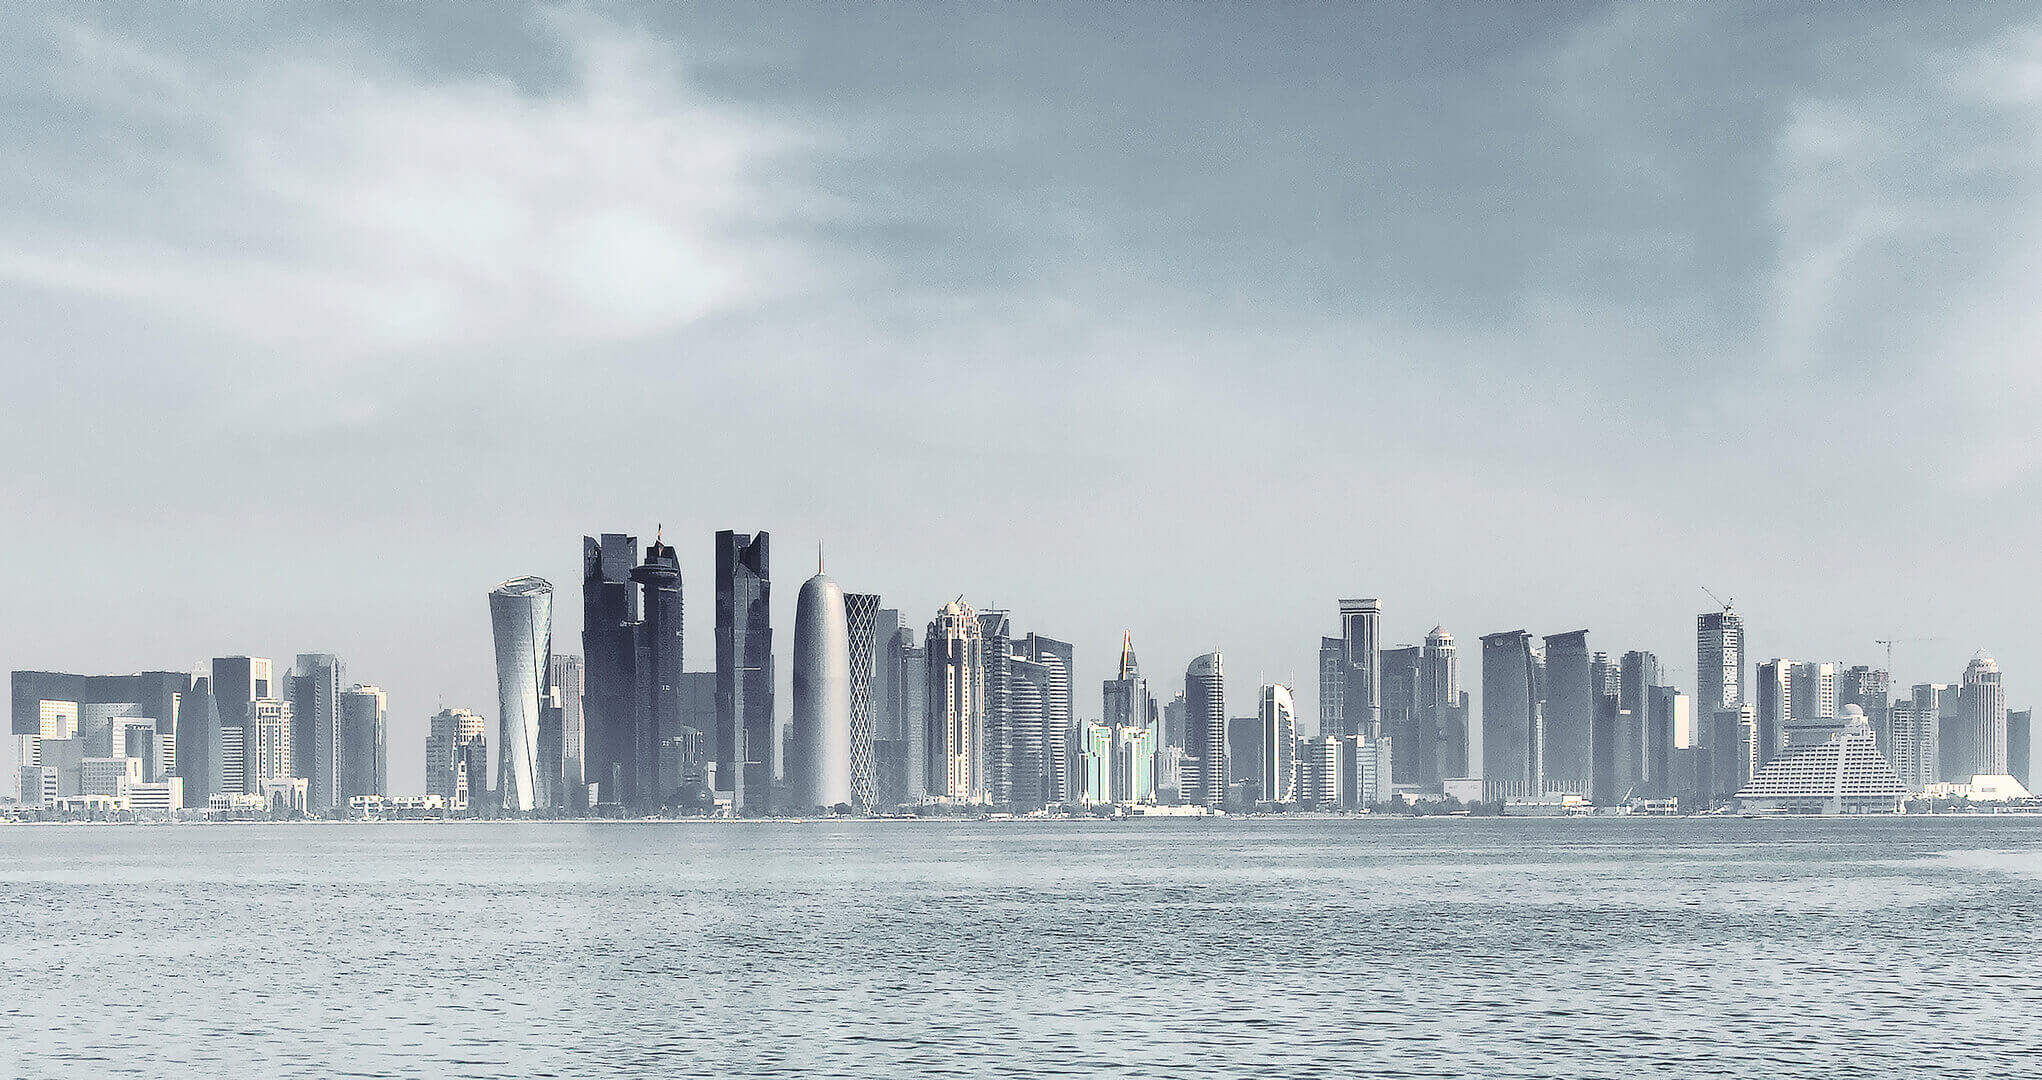 Doha the capital and largest city of the Arab state of Qatar